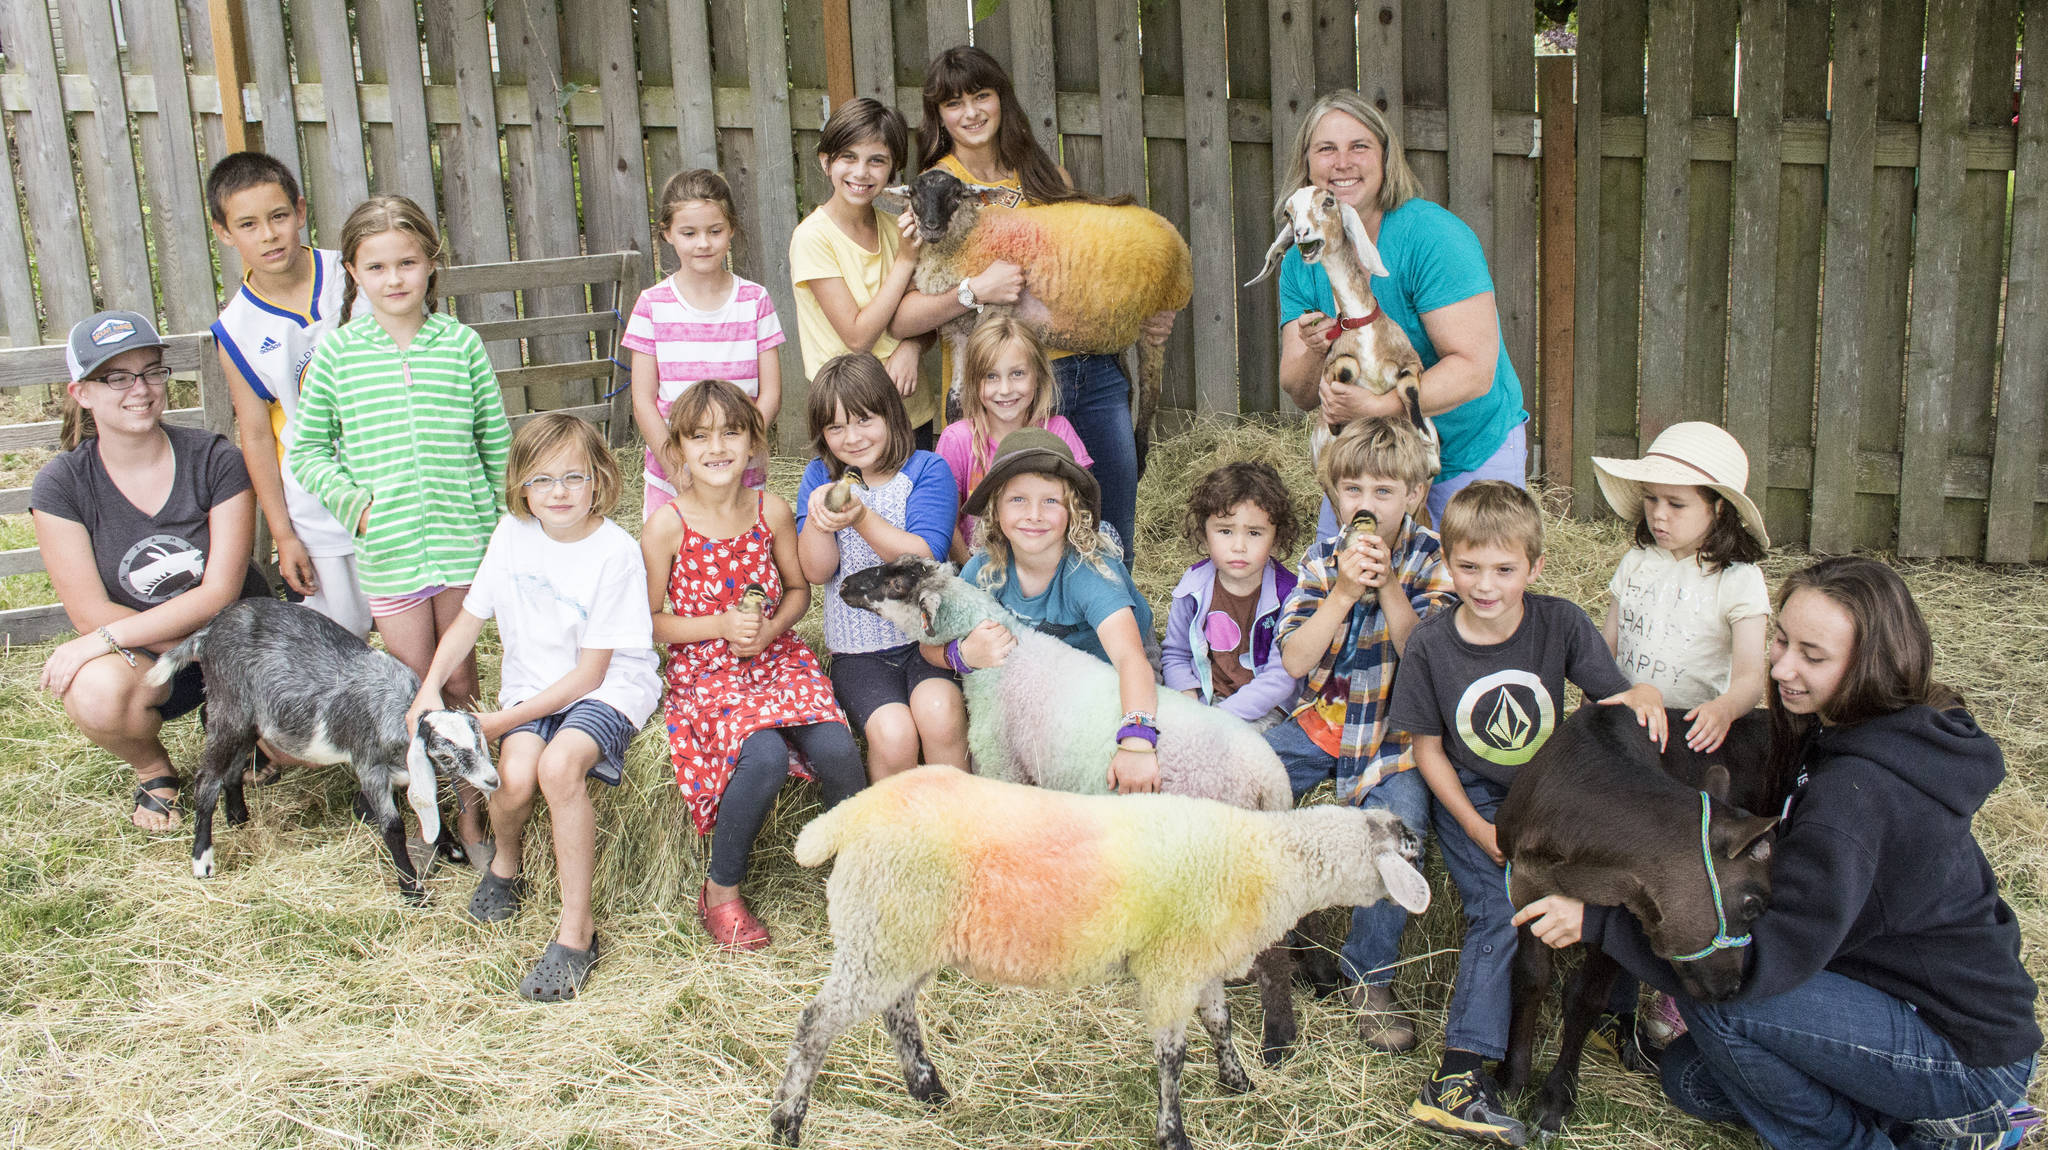 Fun with farm animals | Week-long camp wraps up